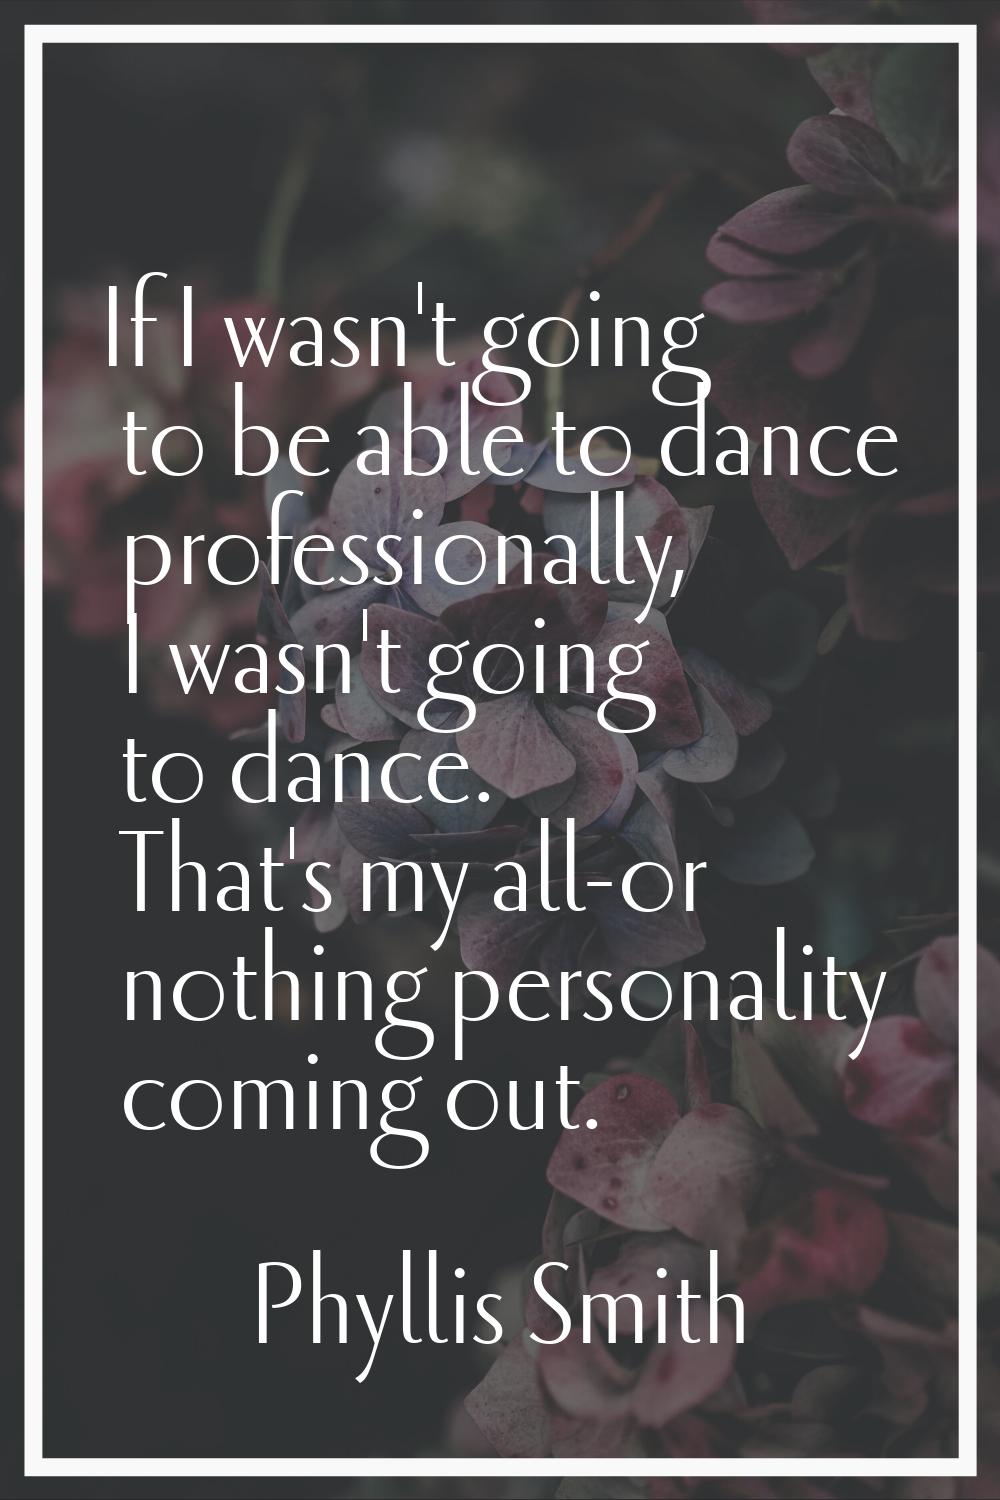 If I wasn't going to be able to dance professionally, I wasn't going to dance. That's my all-or not